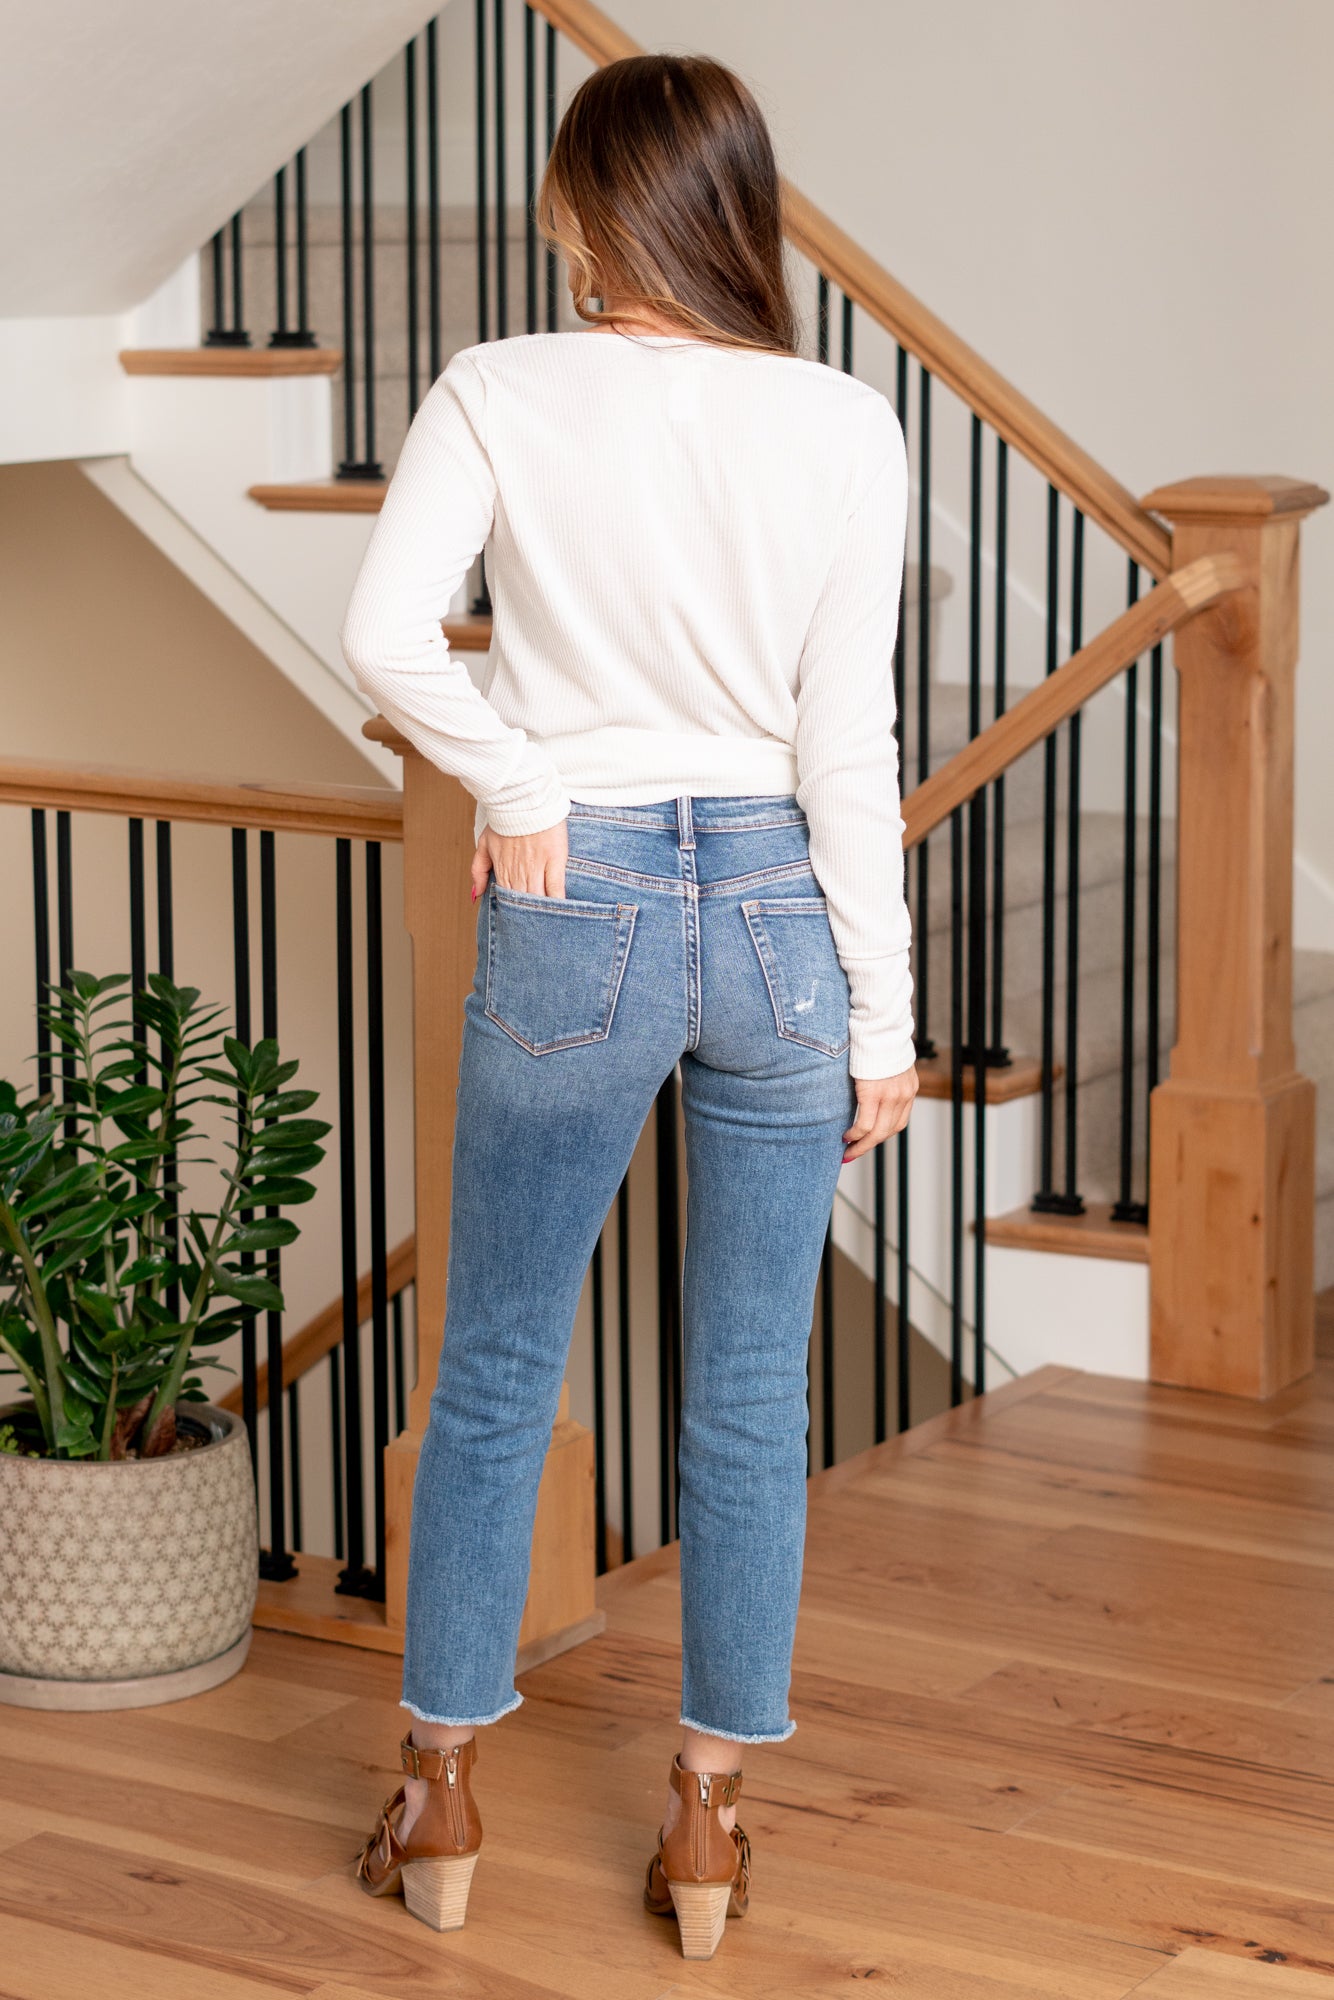 VERVET by Flying Monkey Jeans  These timeless jeans feature a flattering mid-rise silhouette and a modern straight crop leg. Elevate your style effortlessly with the Melissa jeans, offering a versatile and comfortable option for both casual and more polished looks.